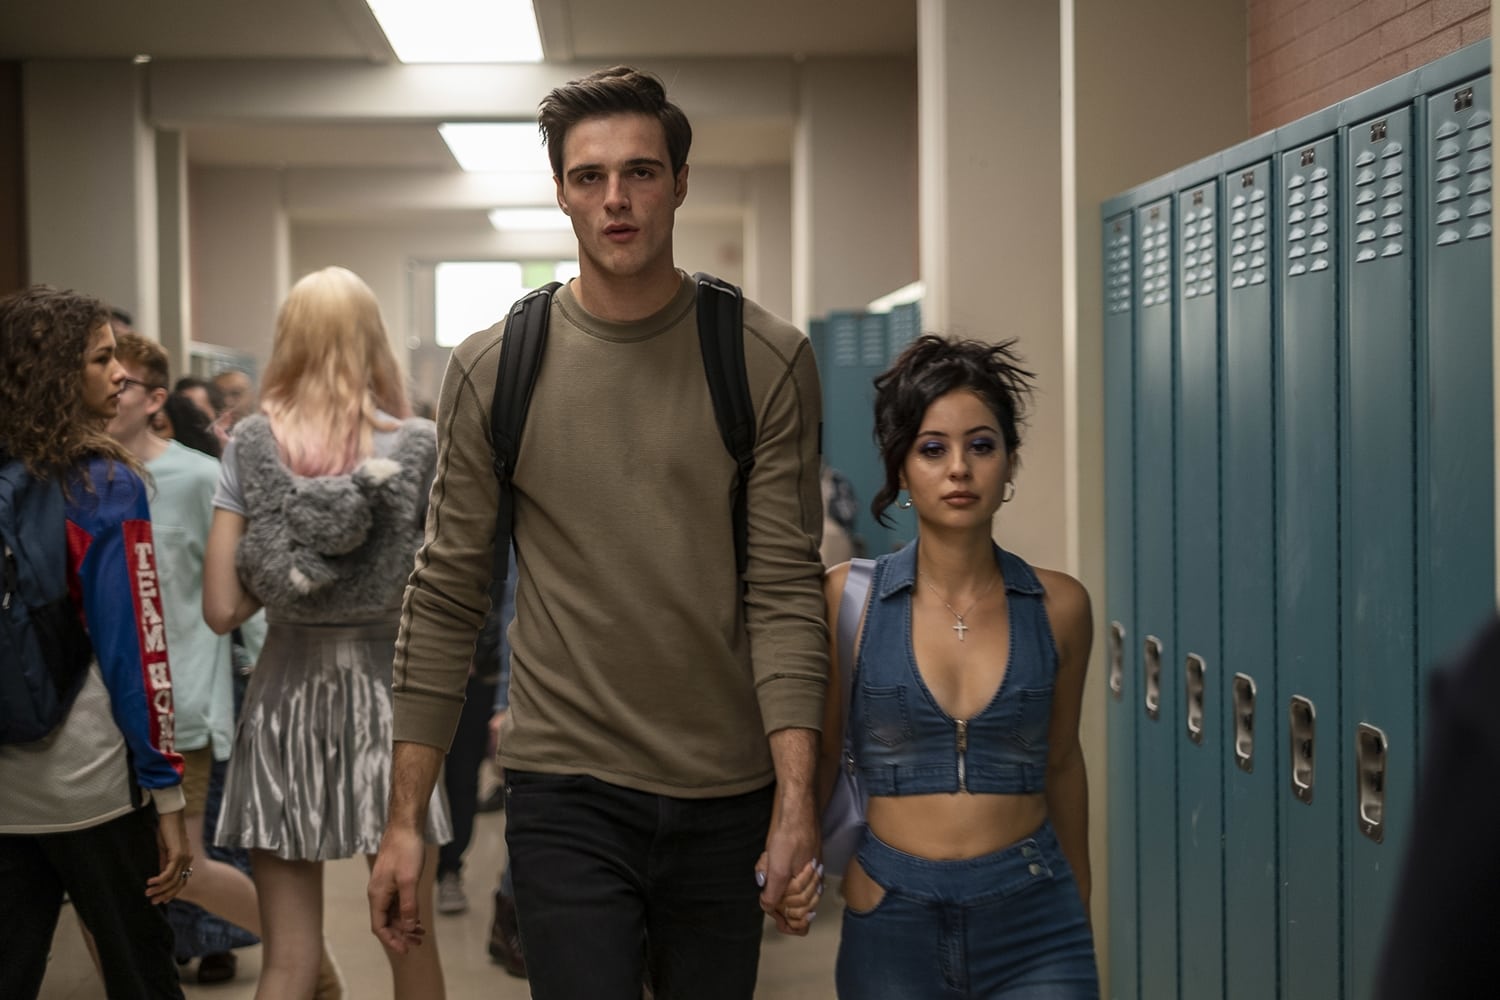 Nate Jacobs (played by Jacob Elordi) and his much shorter girlfriend Maddy Perez (played by Alexa Demie) in Euphoria